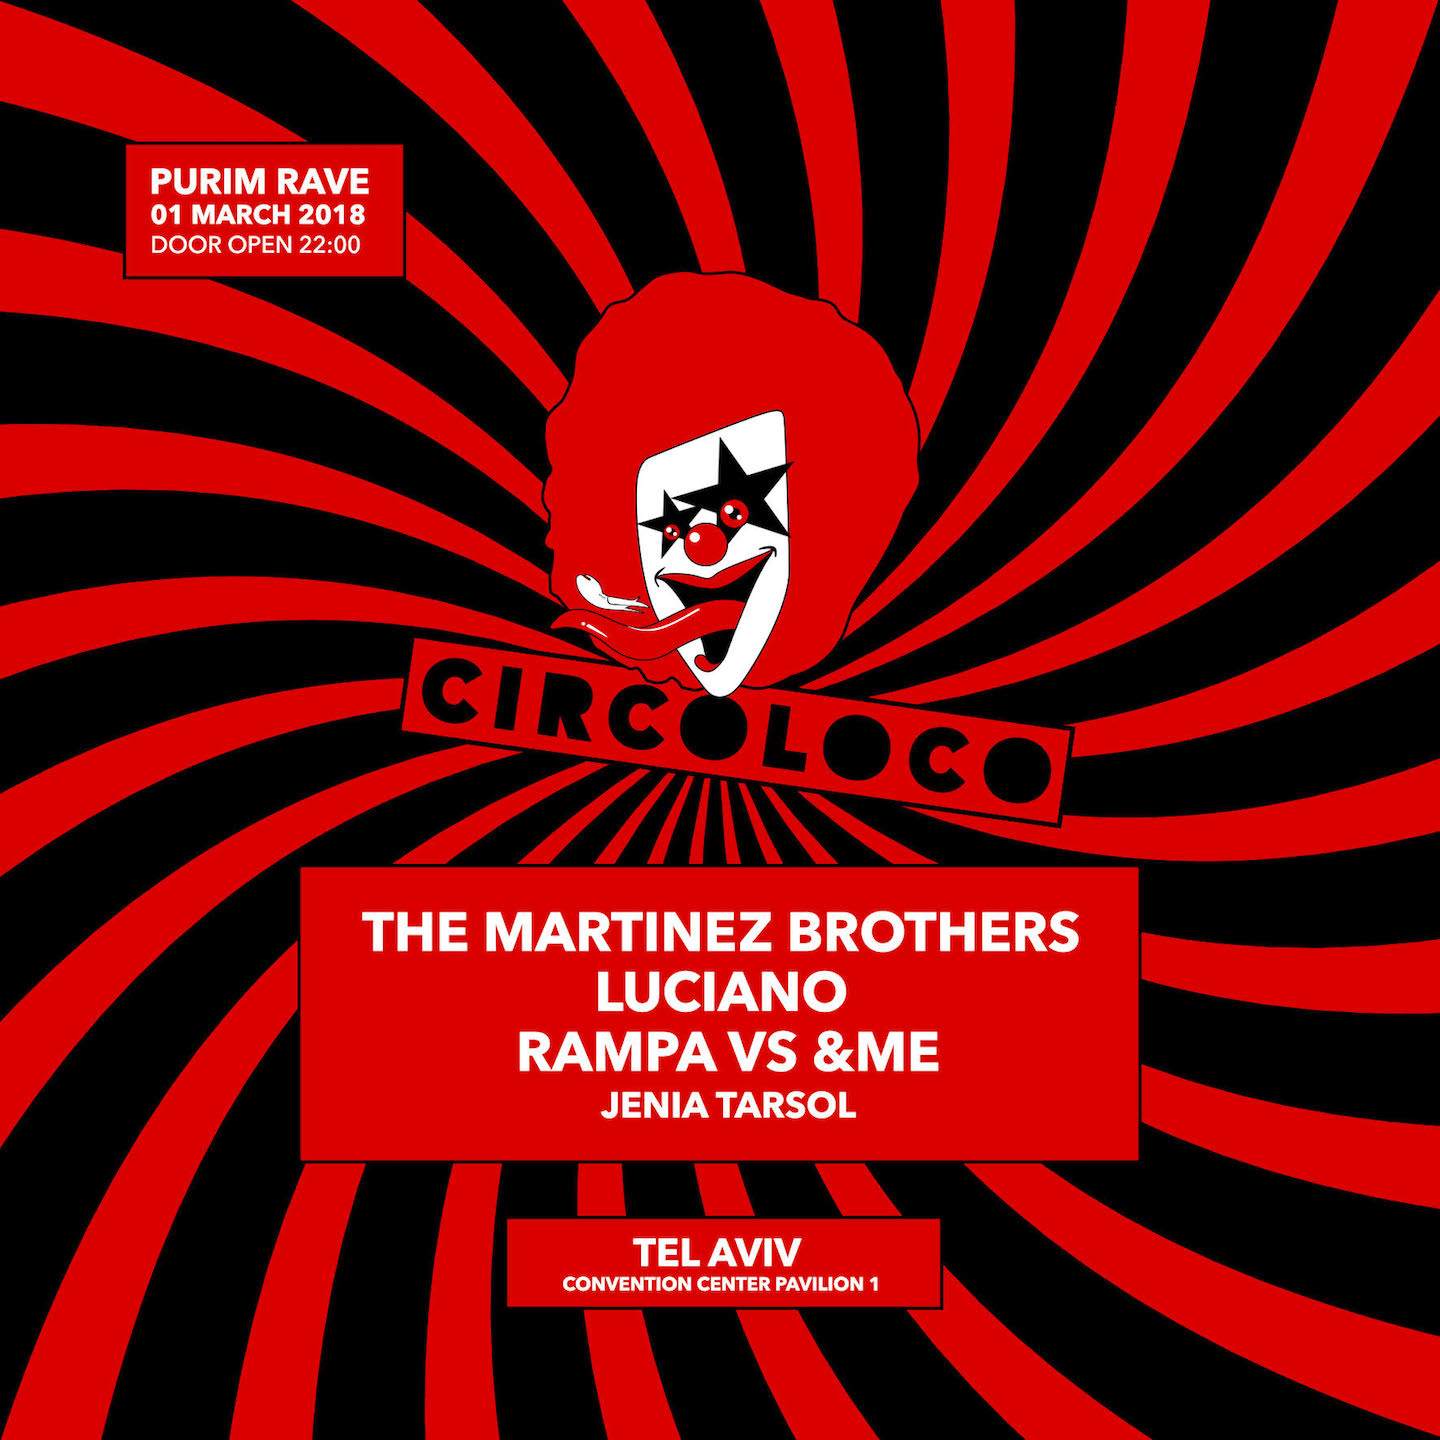 Circoloco comes to Tel Aviv with The Martinez Brothers image